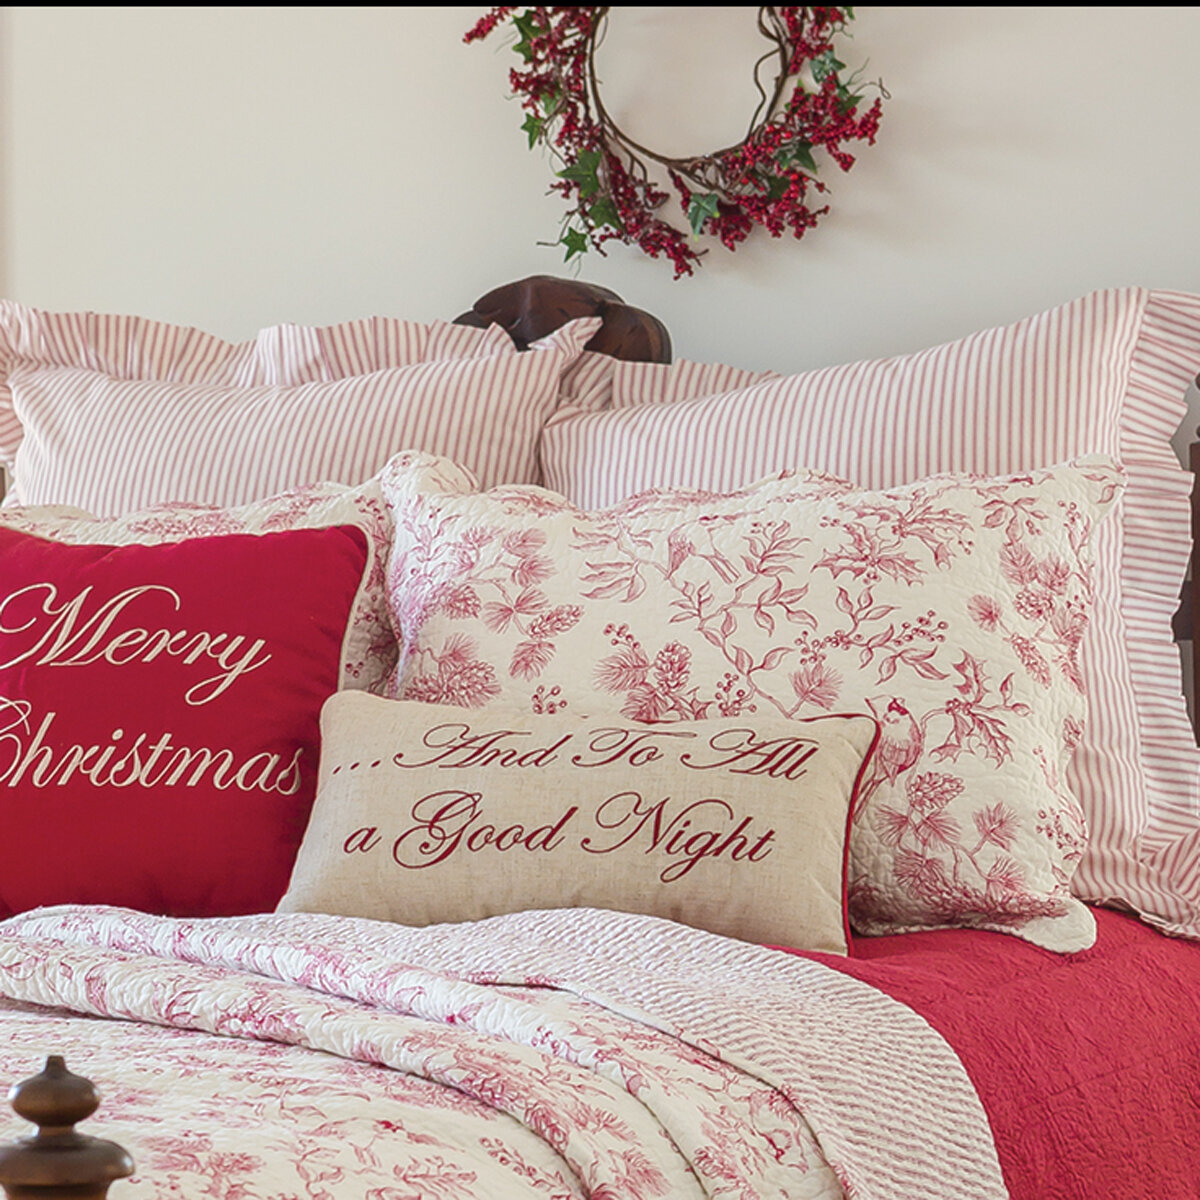 show original title Details about   3D Red Socks C158 Christmas Quilt Bed Cover Christmas Bed Zoe 